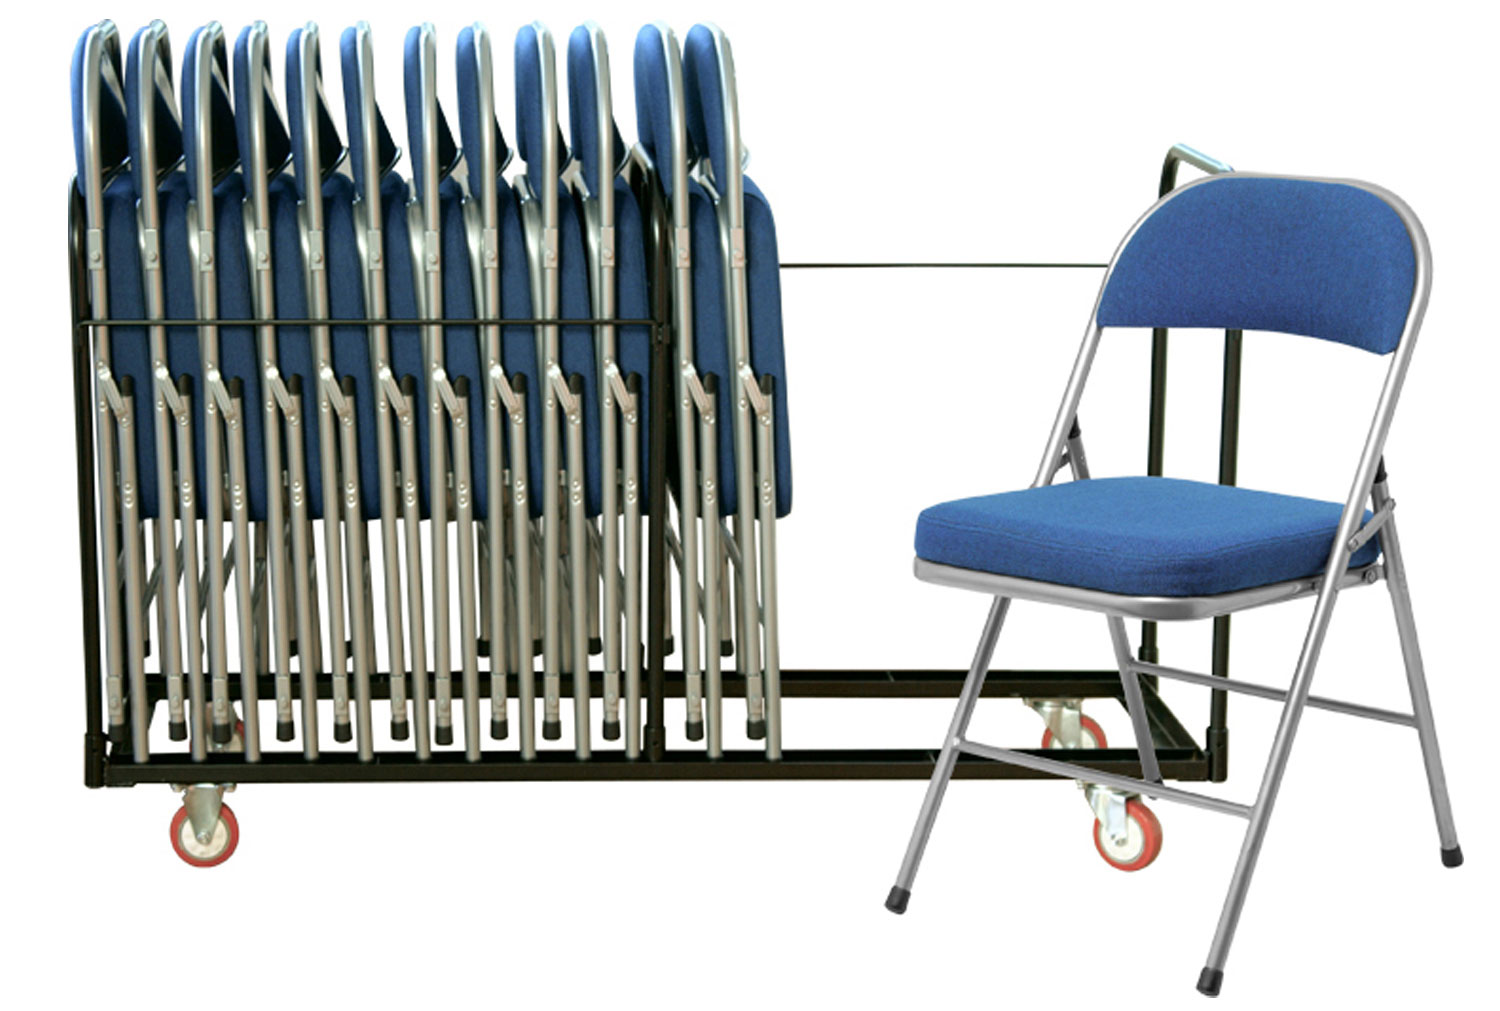 Deluxe Folding Office Chair Bundle Deal (18 Office Chairs & 1 Trolley), Blue